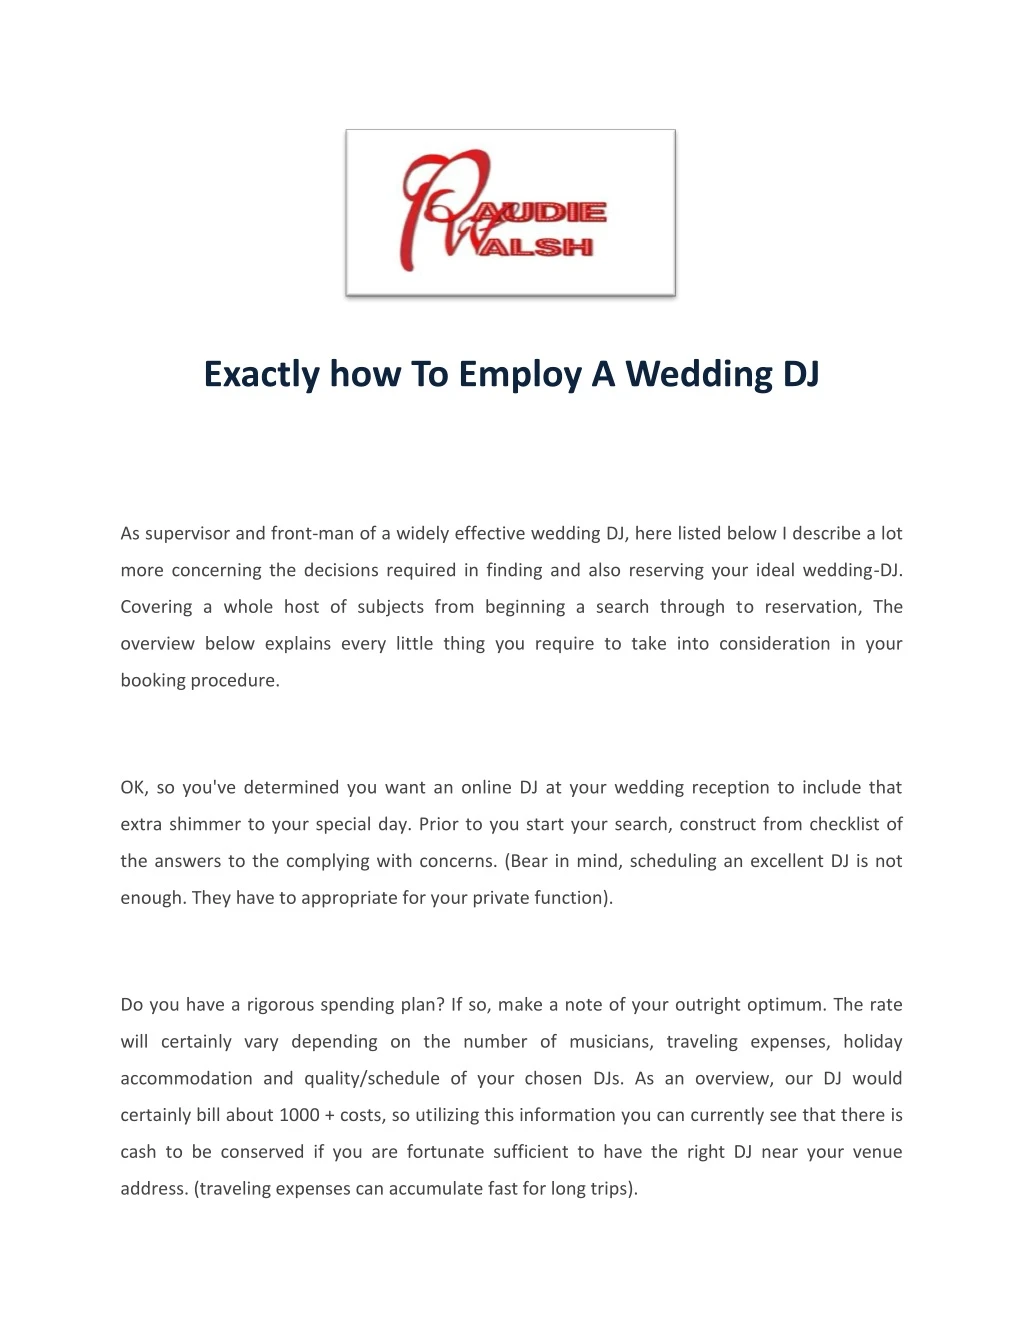 exactly how to employ a wedding dj